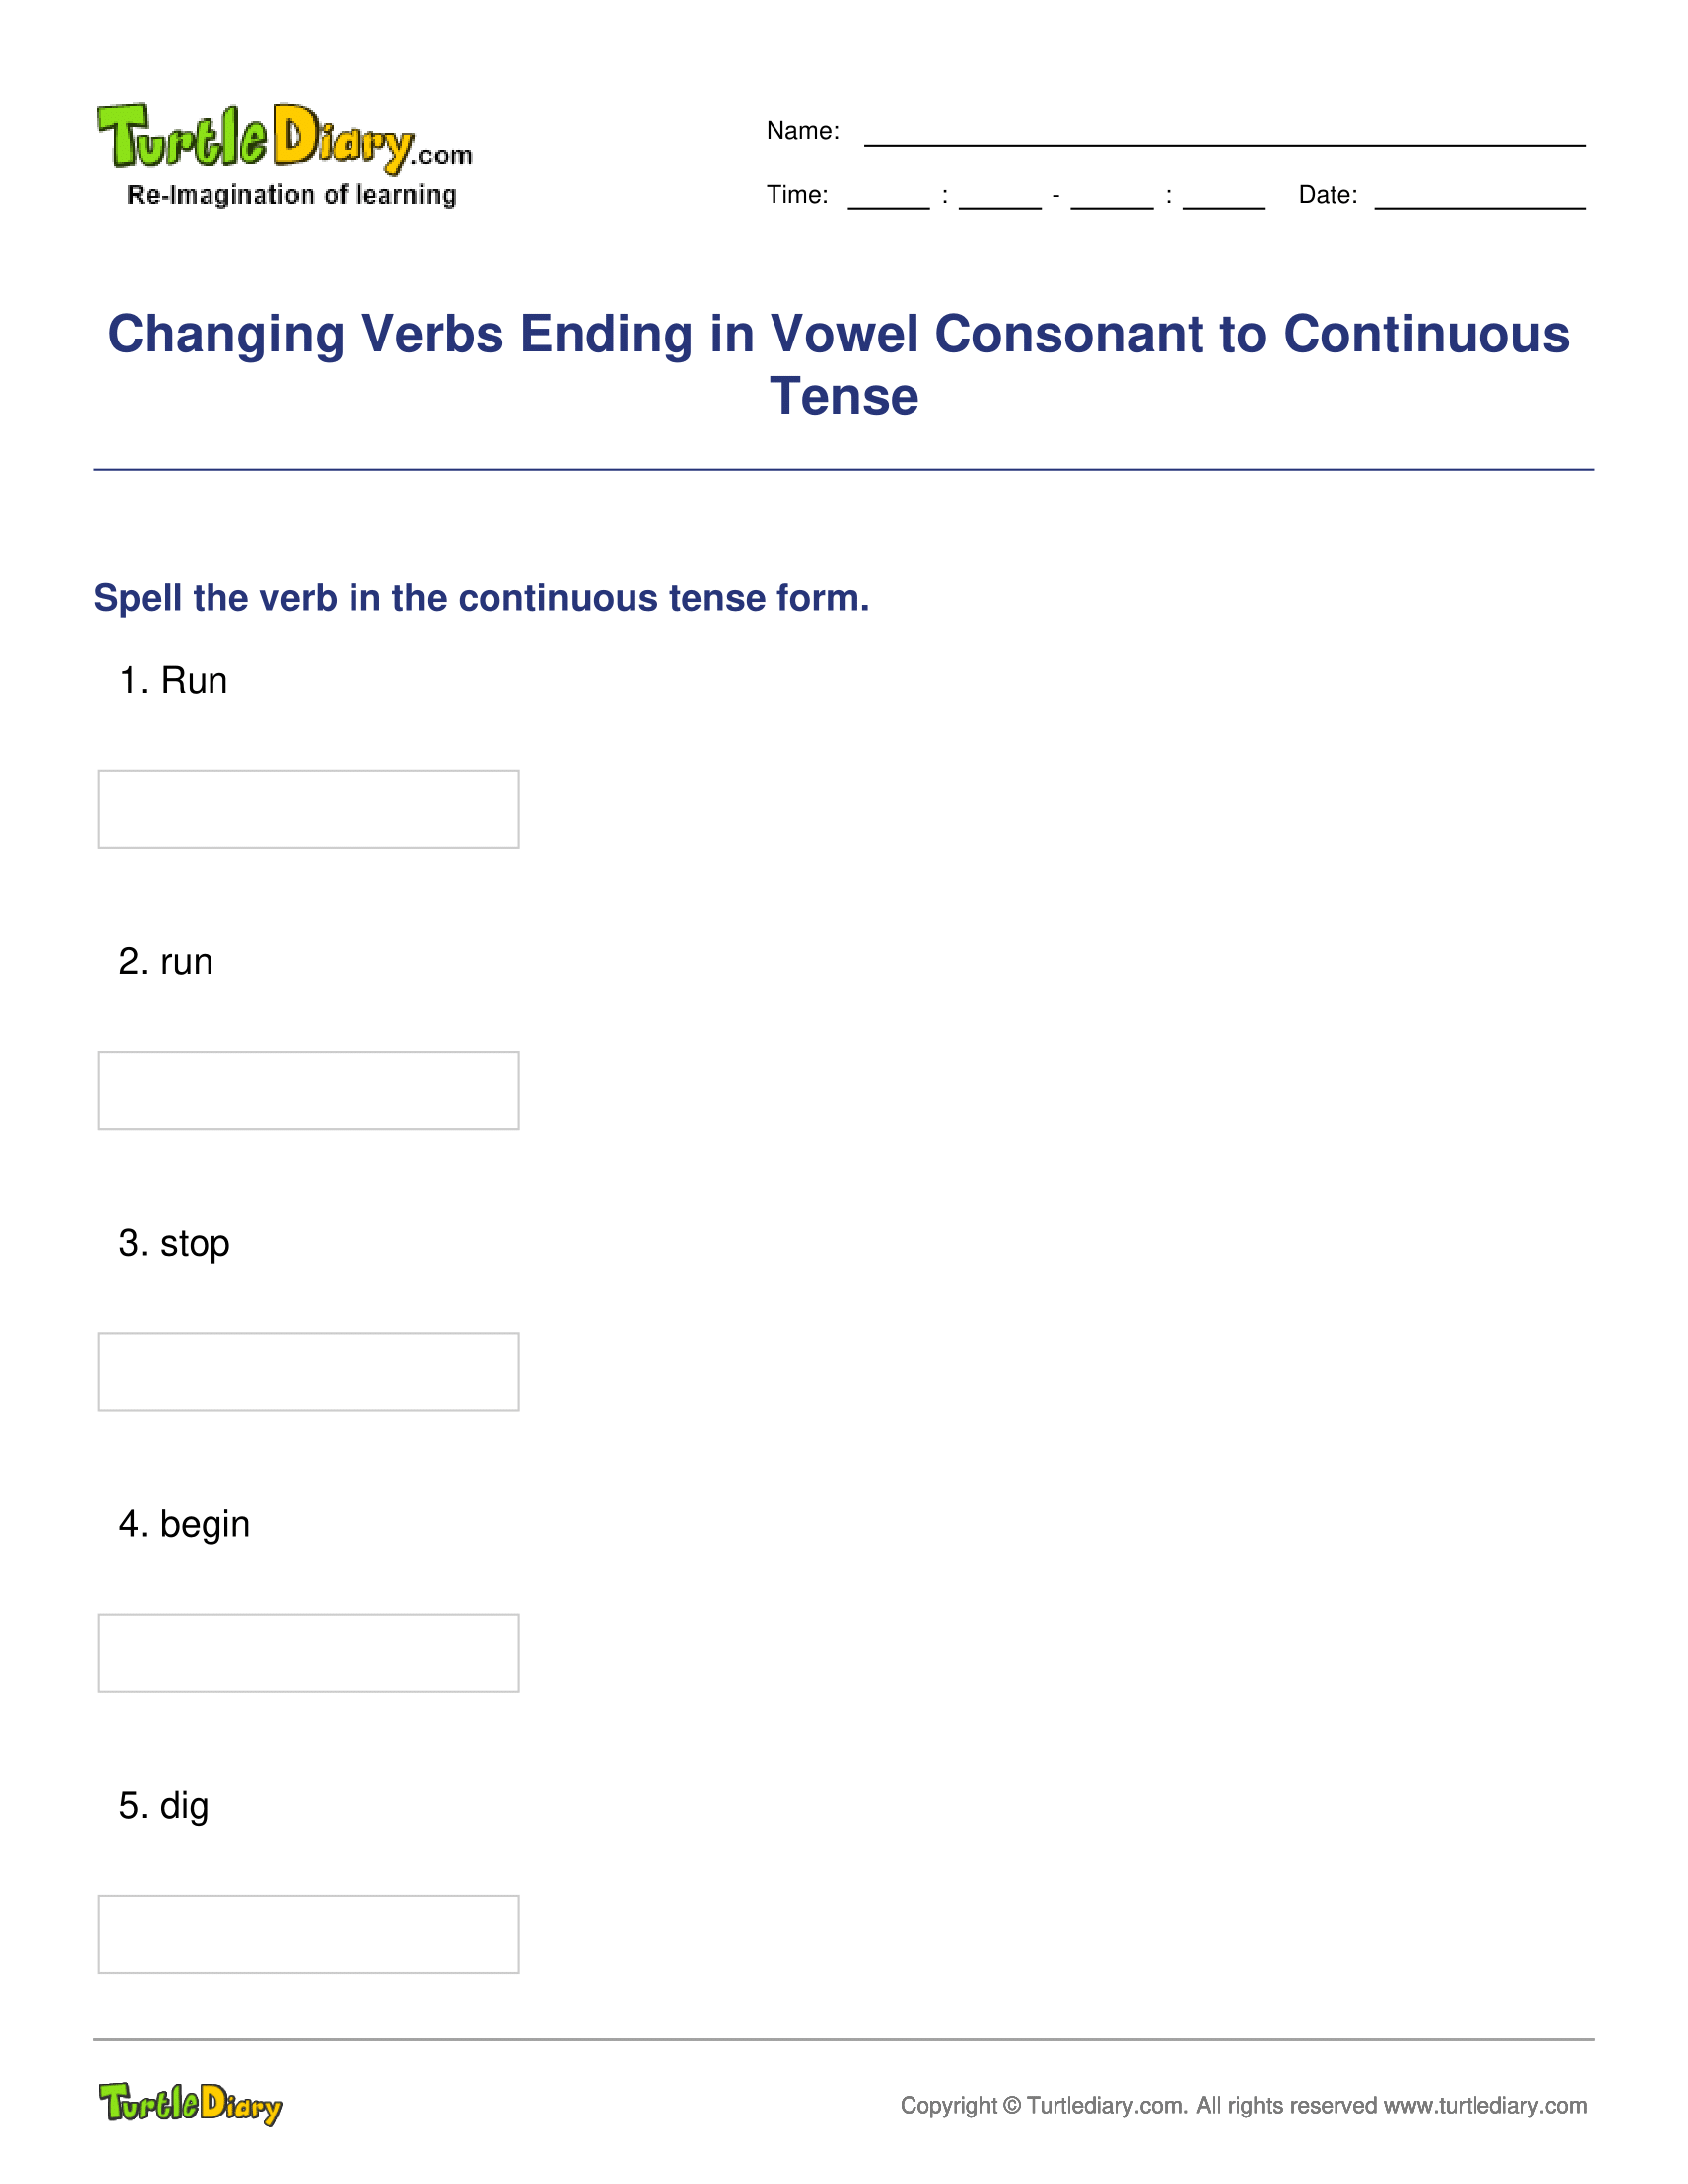 Changing Verbs Ending in Vowel   Consonant to Continuous Tense